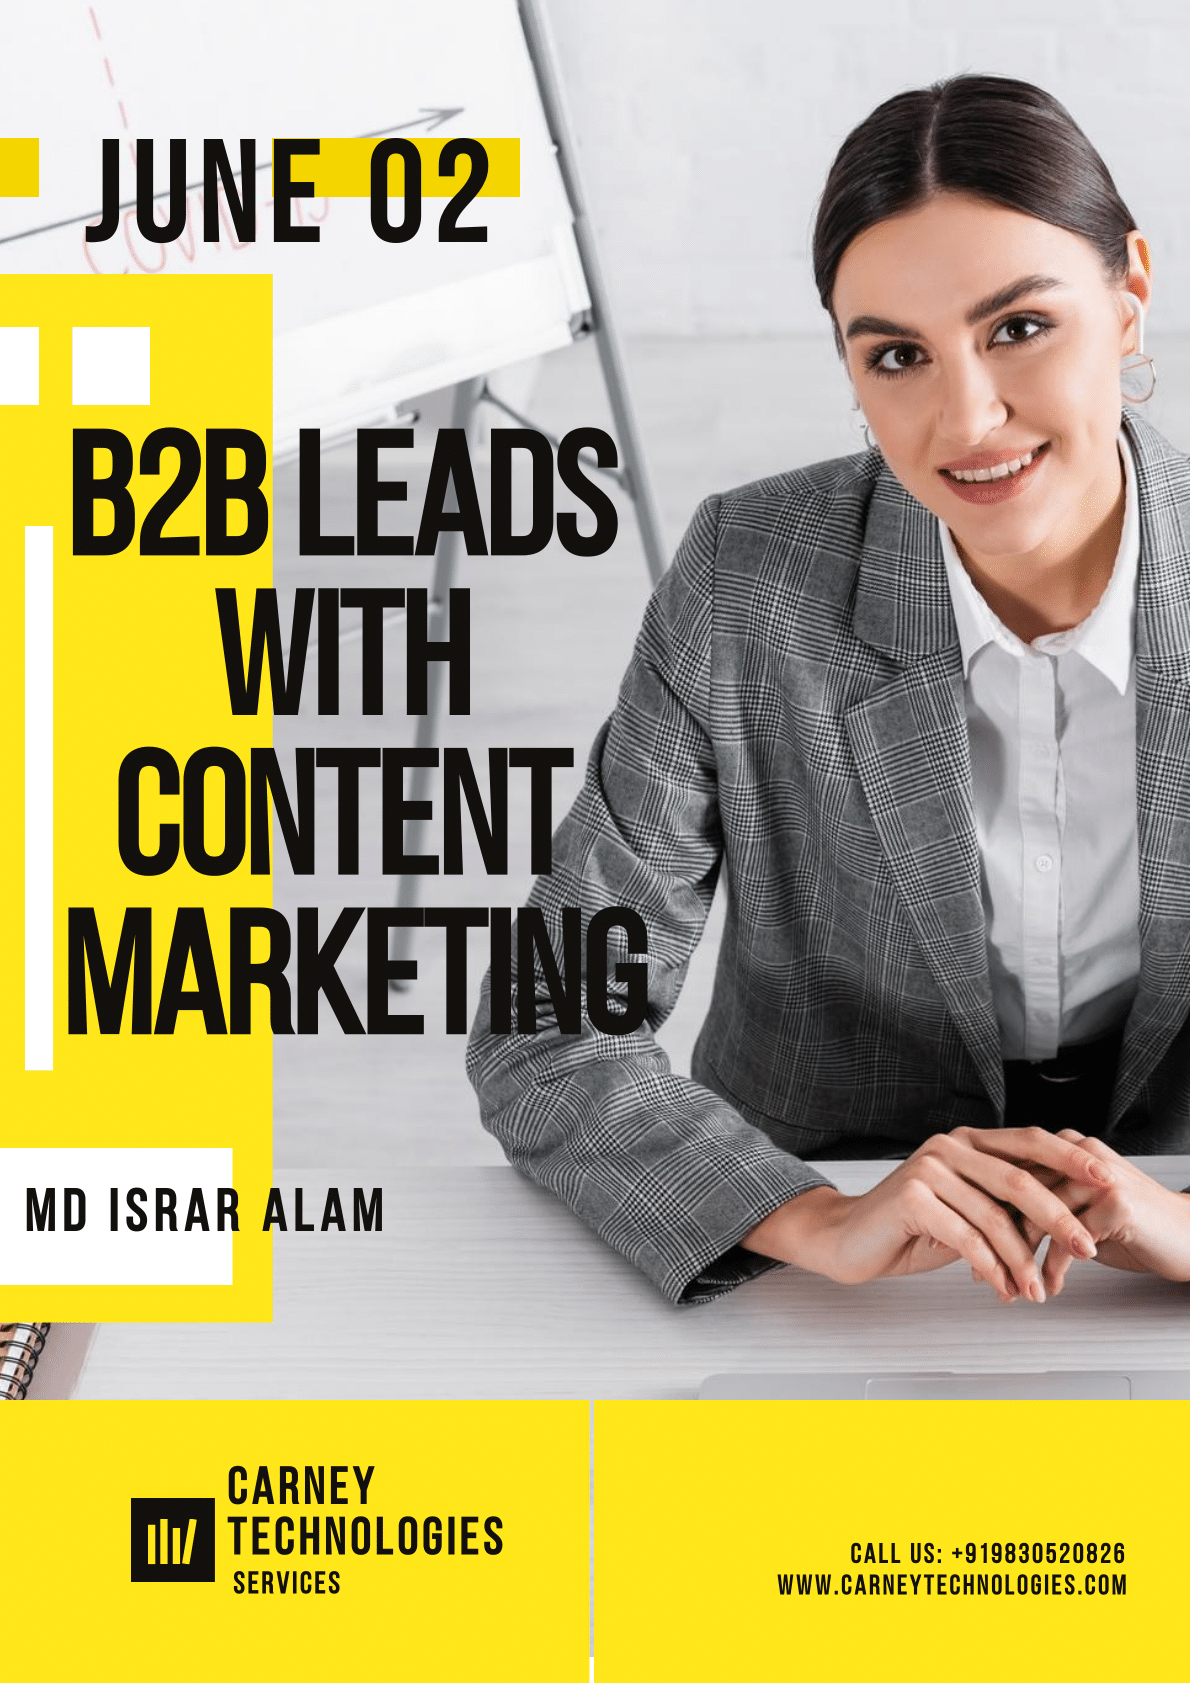 How do we generate B2B leads with content marketing?